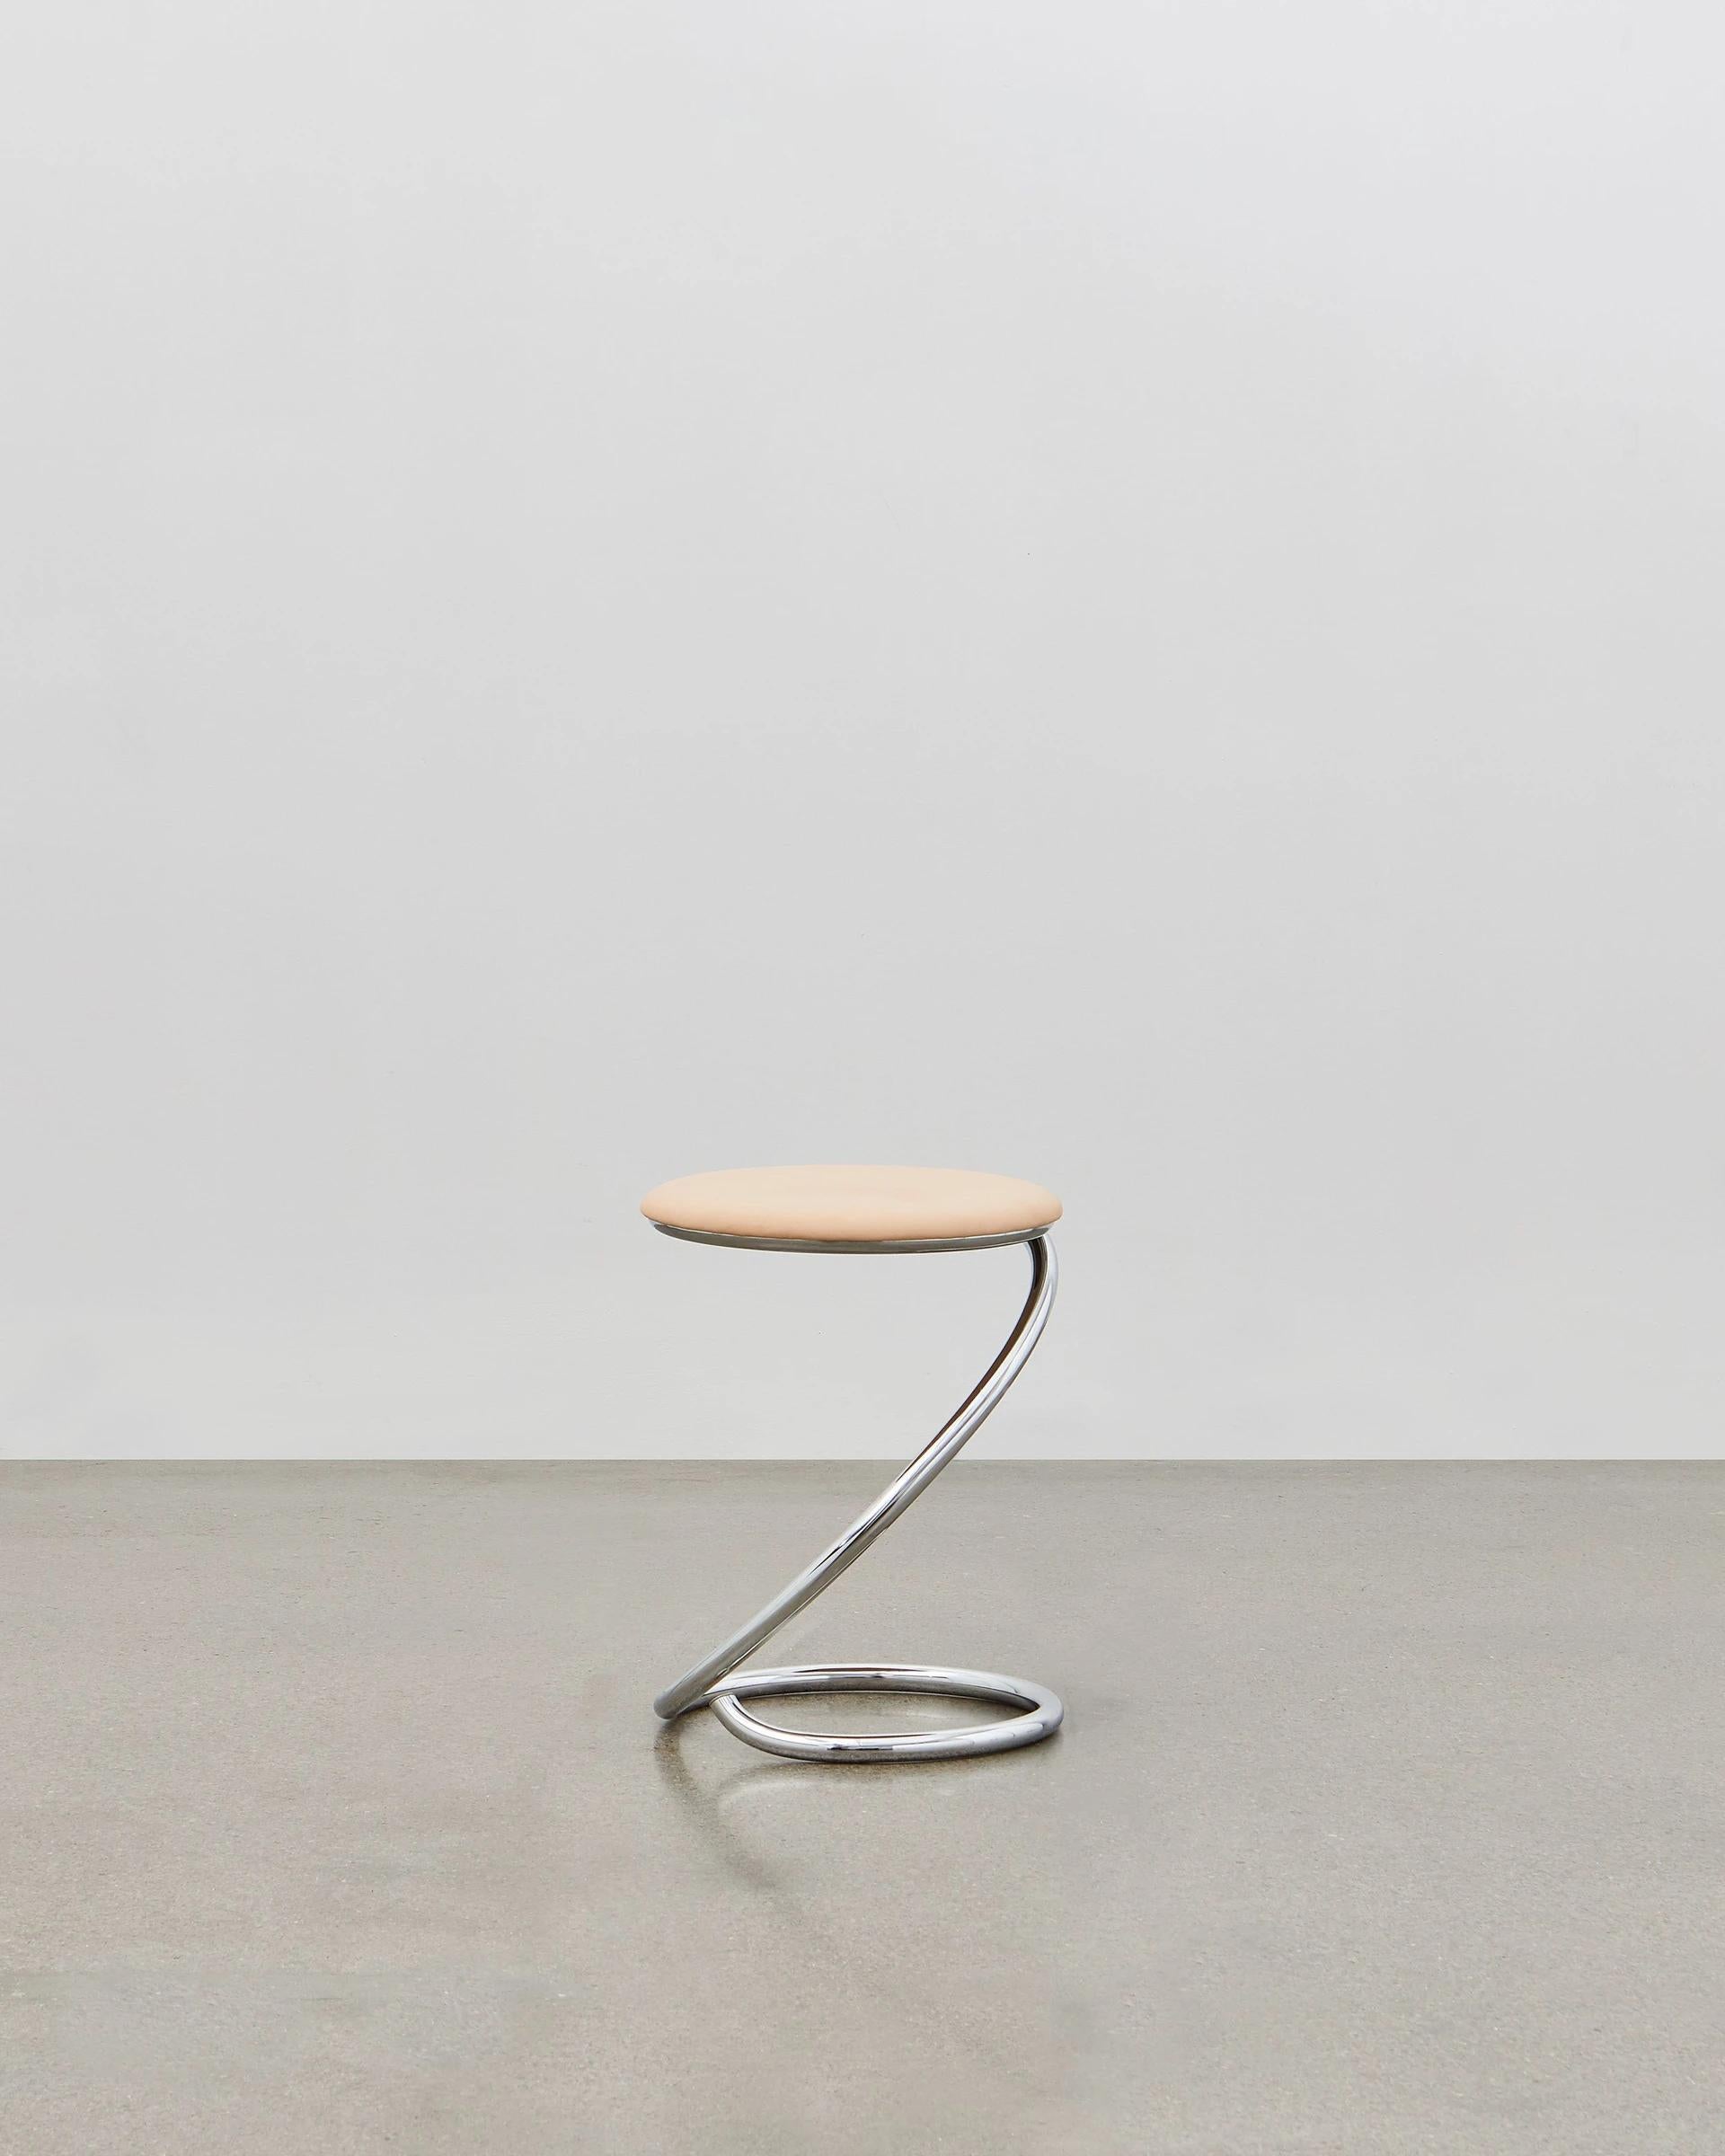 The PH snake stool is completely true to the original design and the use of chromed steel tubes, however updated for the 21st century to be available with wood seating in five colorways to coordinate with the ever-popular Poul Henningsen lighting